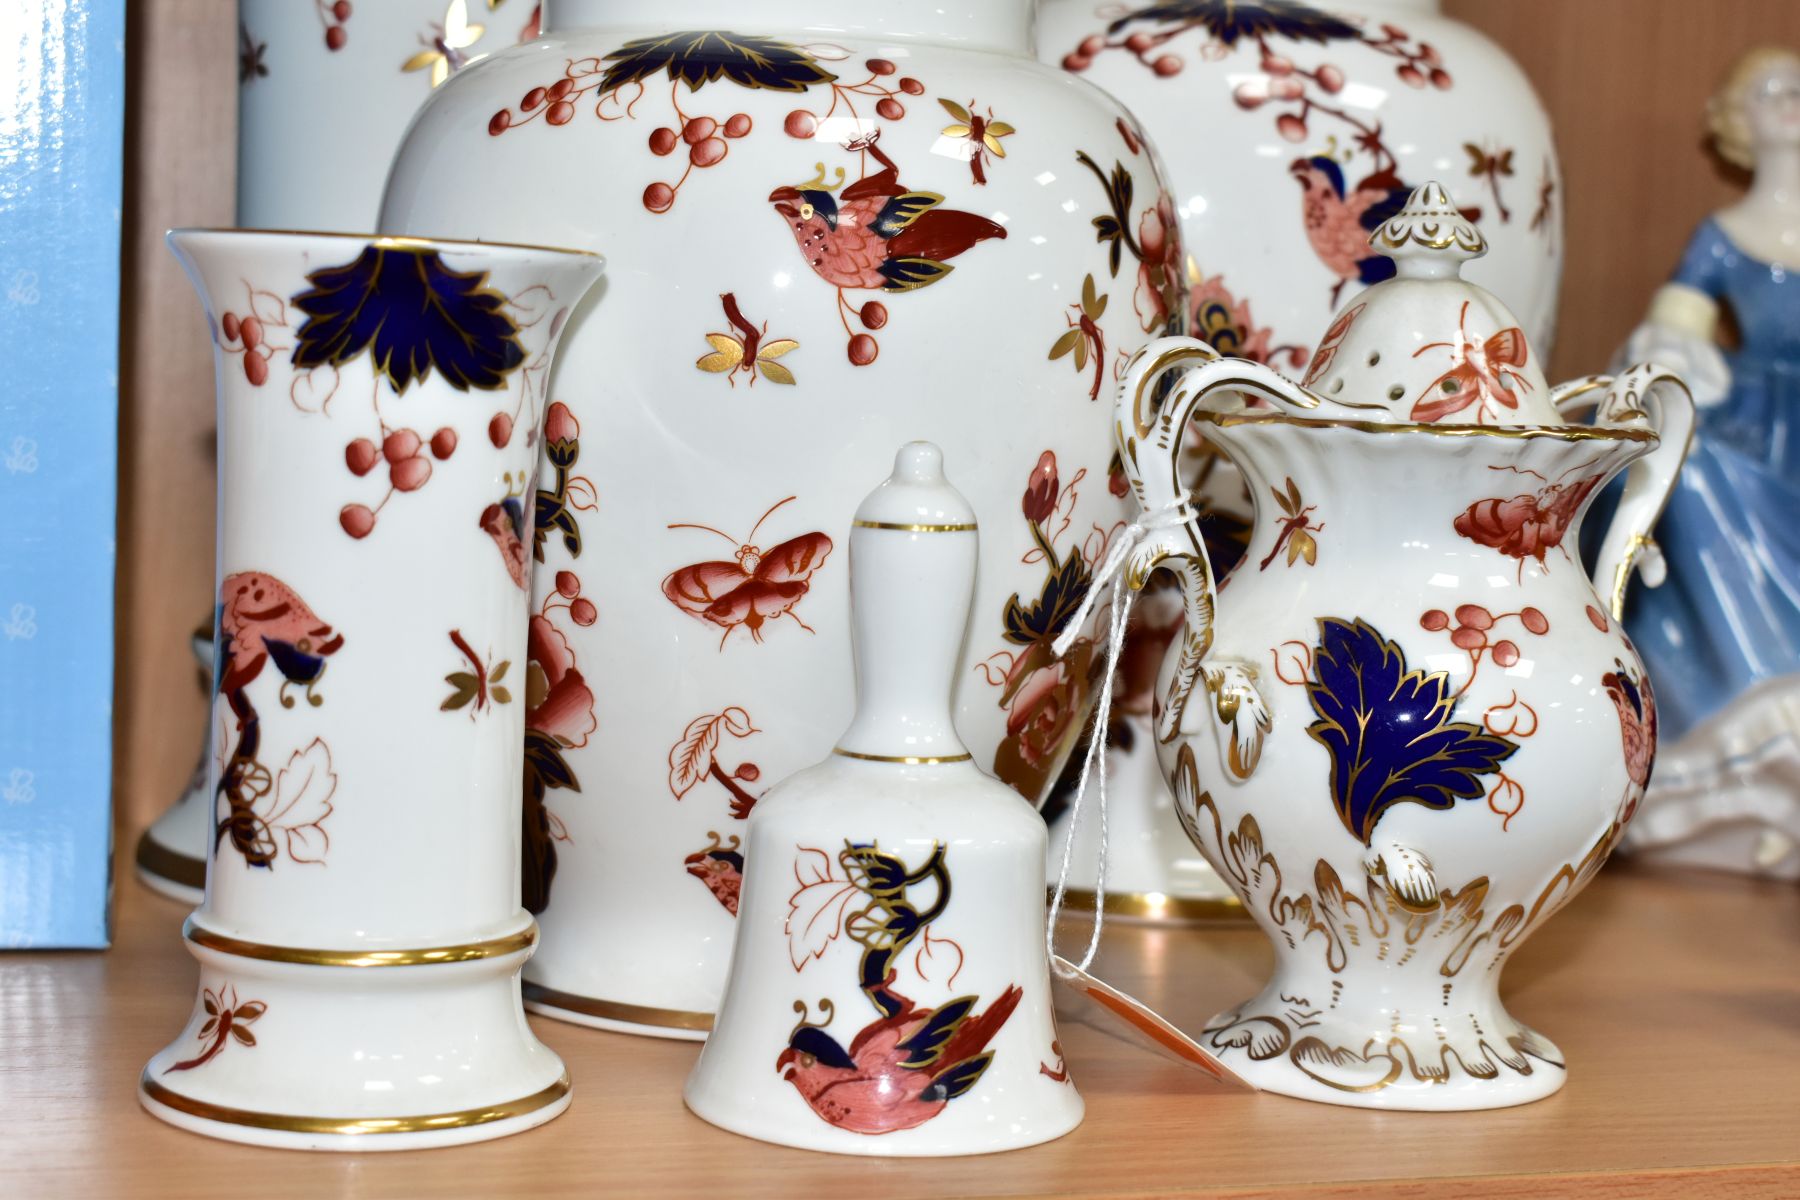 SIX PIECES OF COALPORT HONG KONG CERAMIC WARES, comprising two covered vases heights approximately - Image 3 of 8